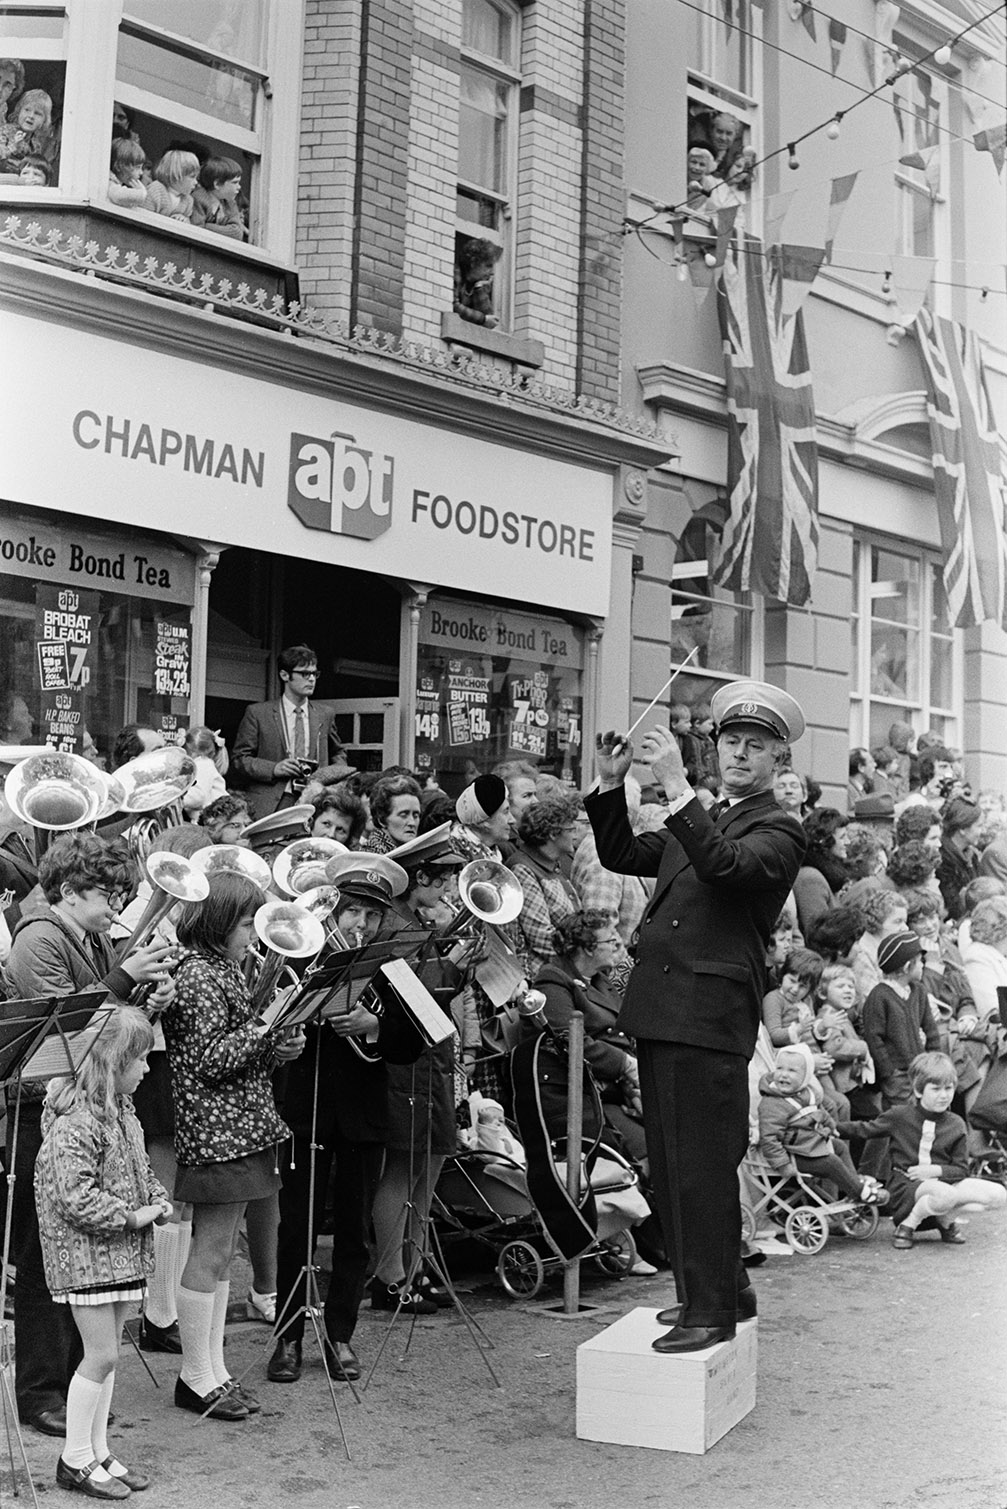 A man conducting a children's brass band at Torrington May Fair outside Chapman Food Store. Spectators are watching the parade from the street and first floor windows of buildings along the street.